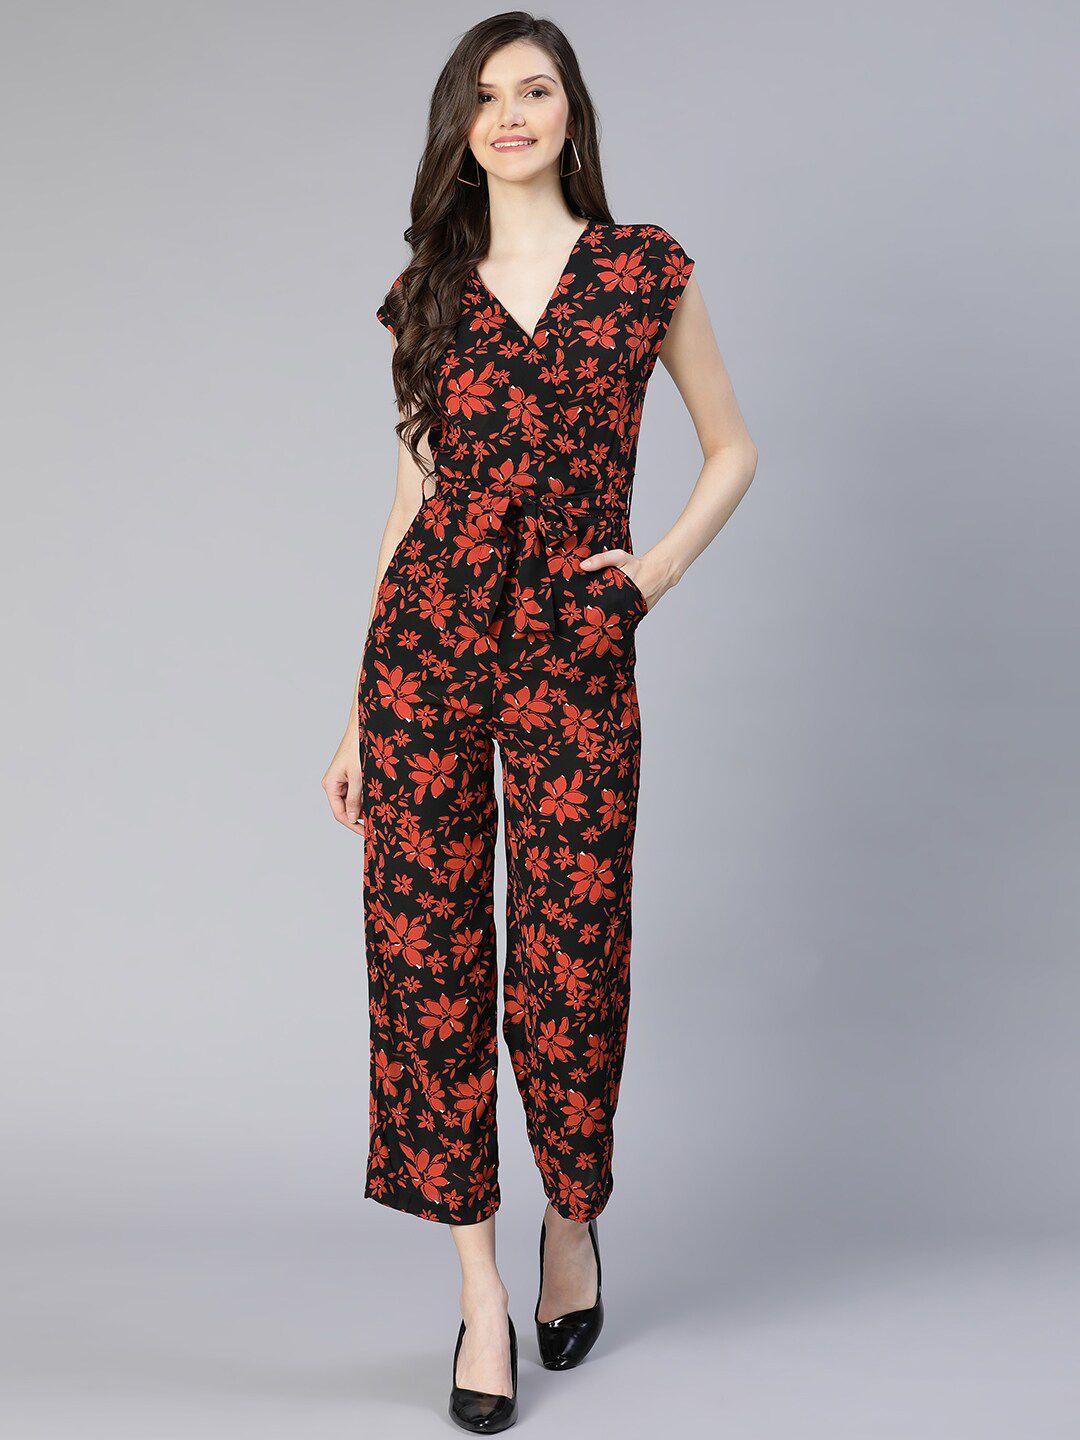 oxolloxo-women-black-&-red-printed-basic-jumpsuit